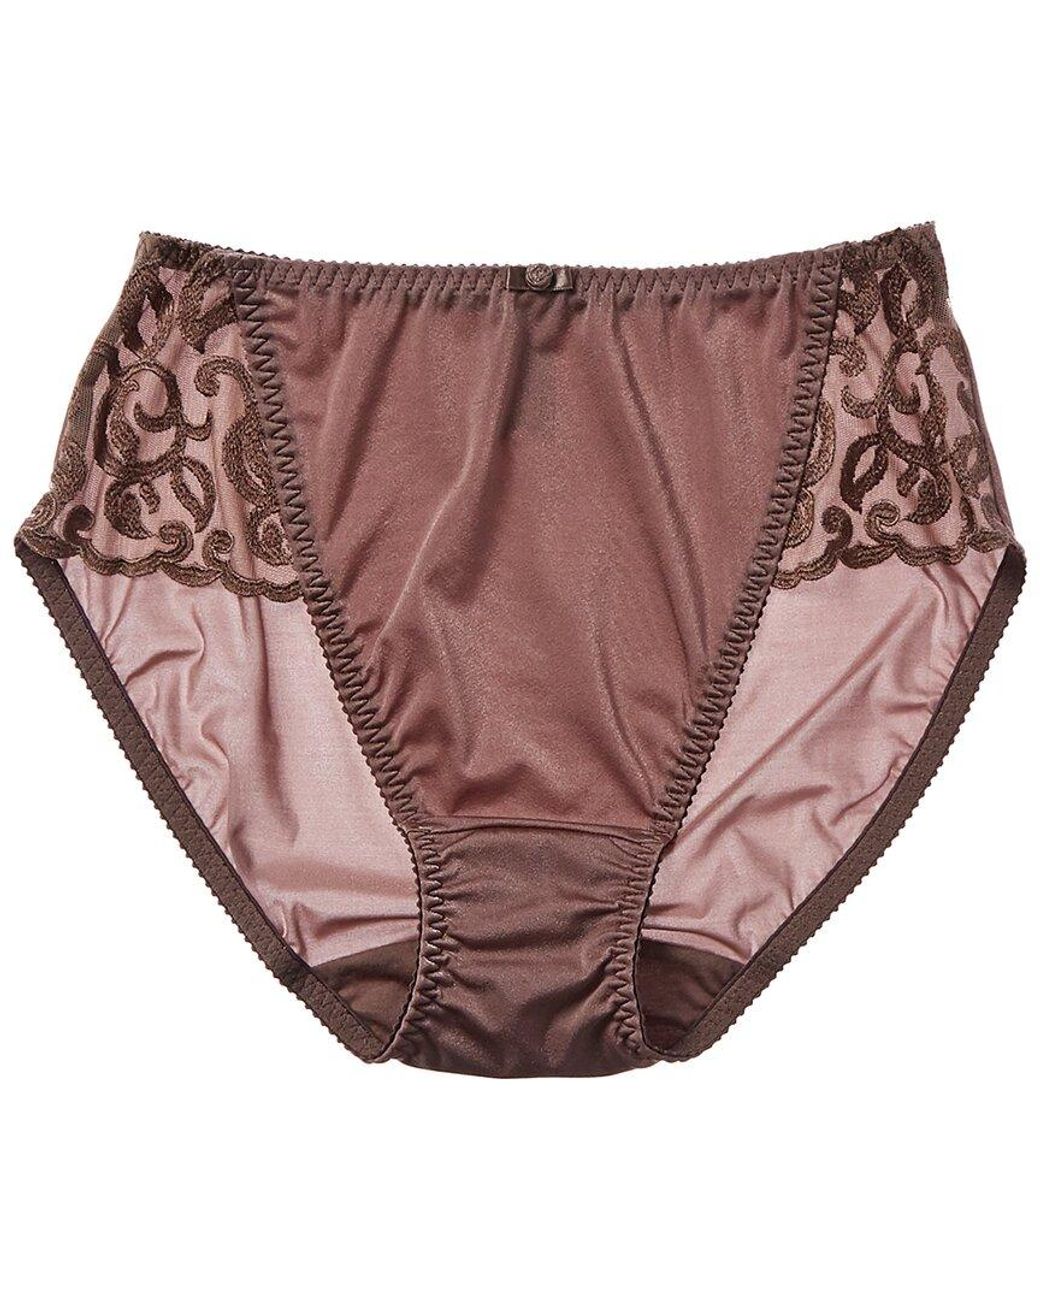 Wacoal Synthetic Arabesque Hi-cut Brief in Brown - Lyst